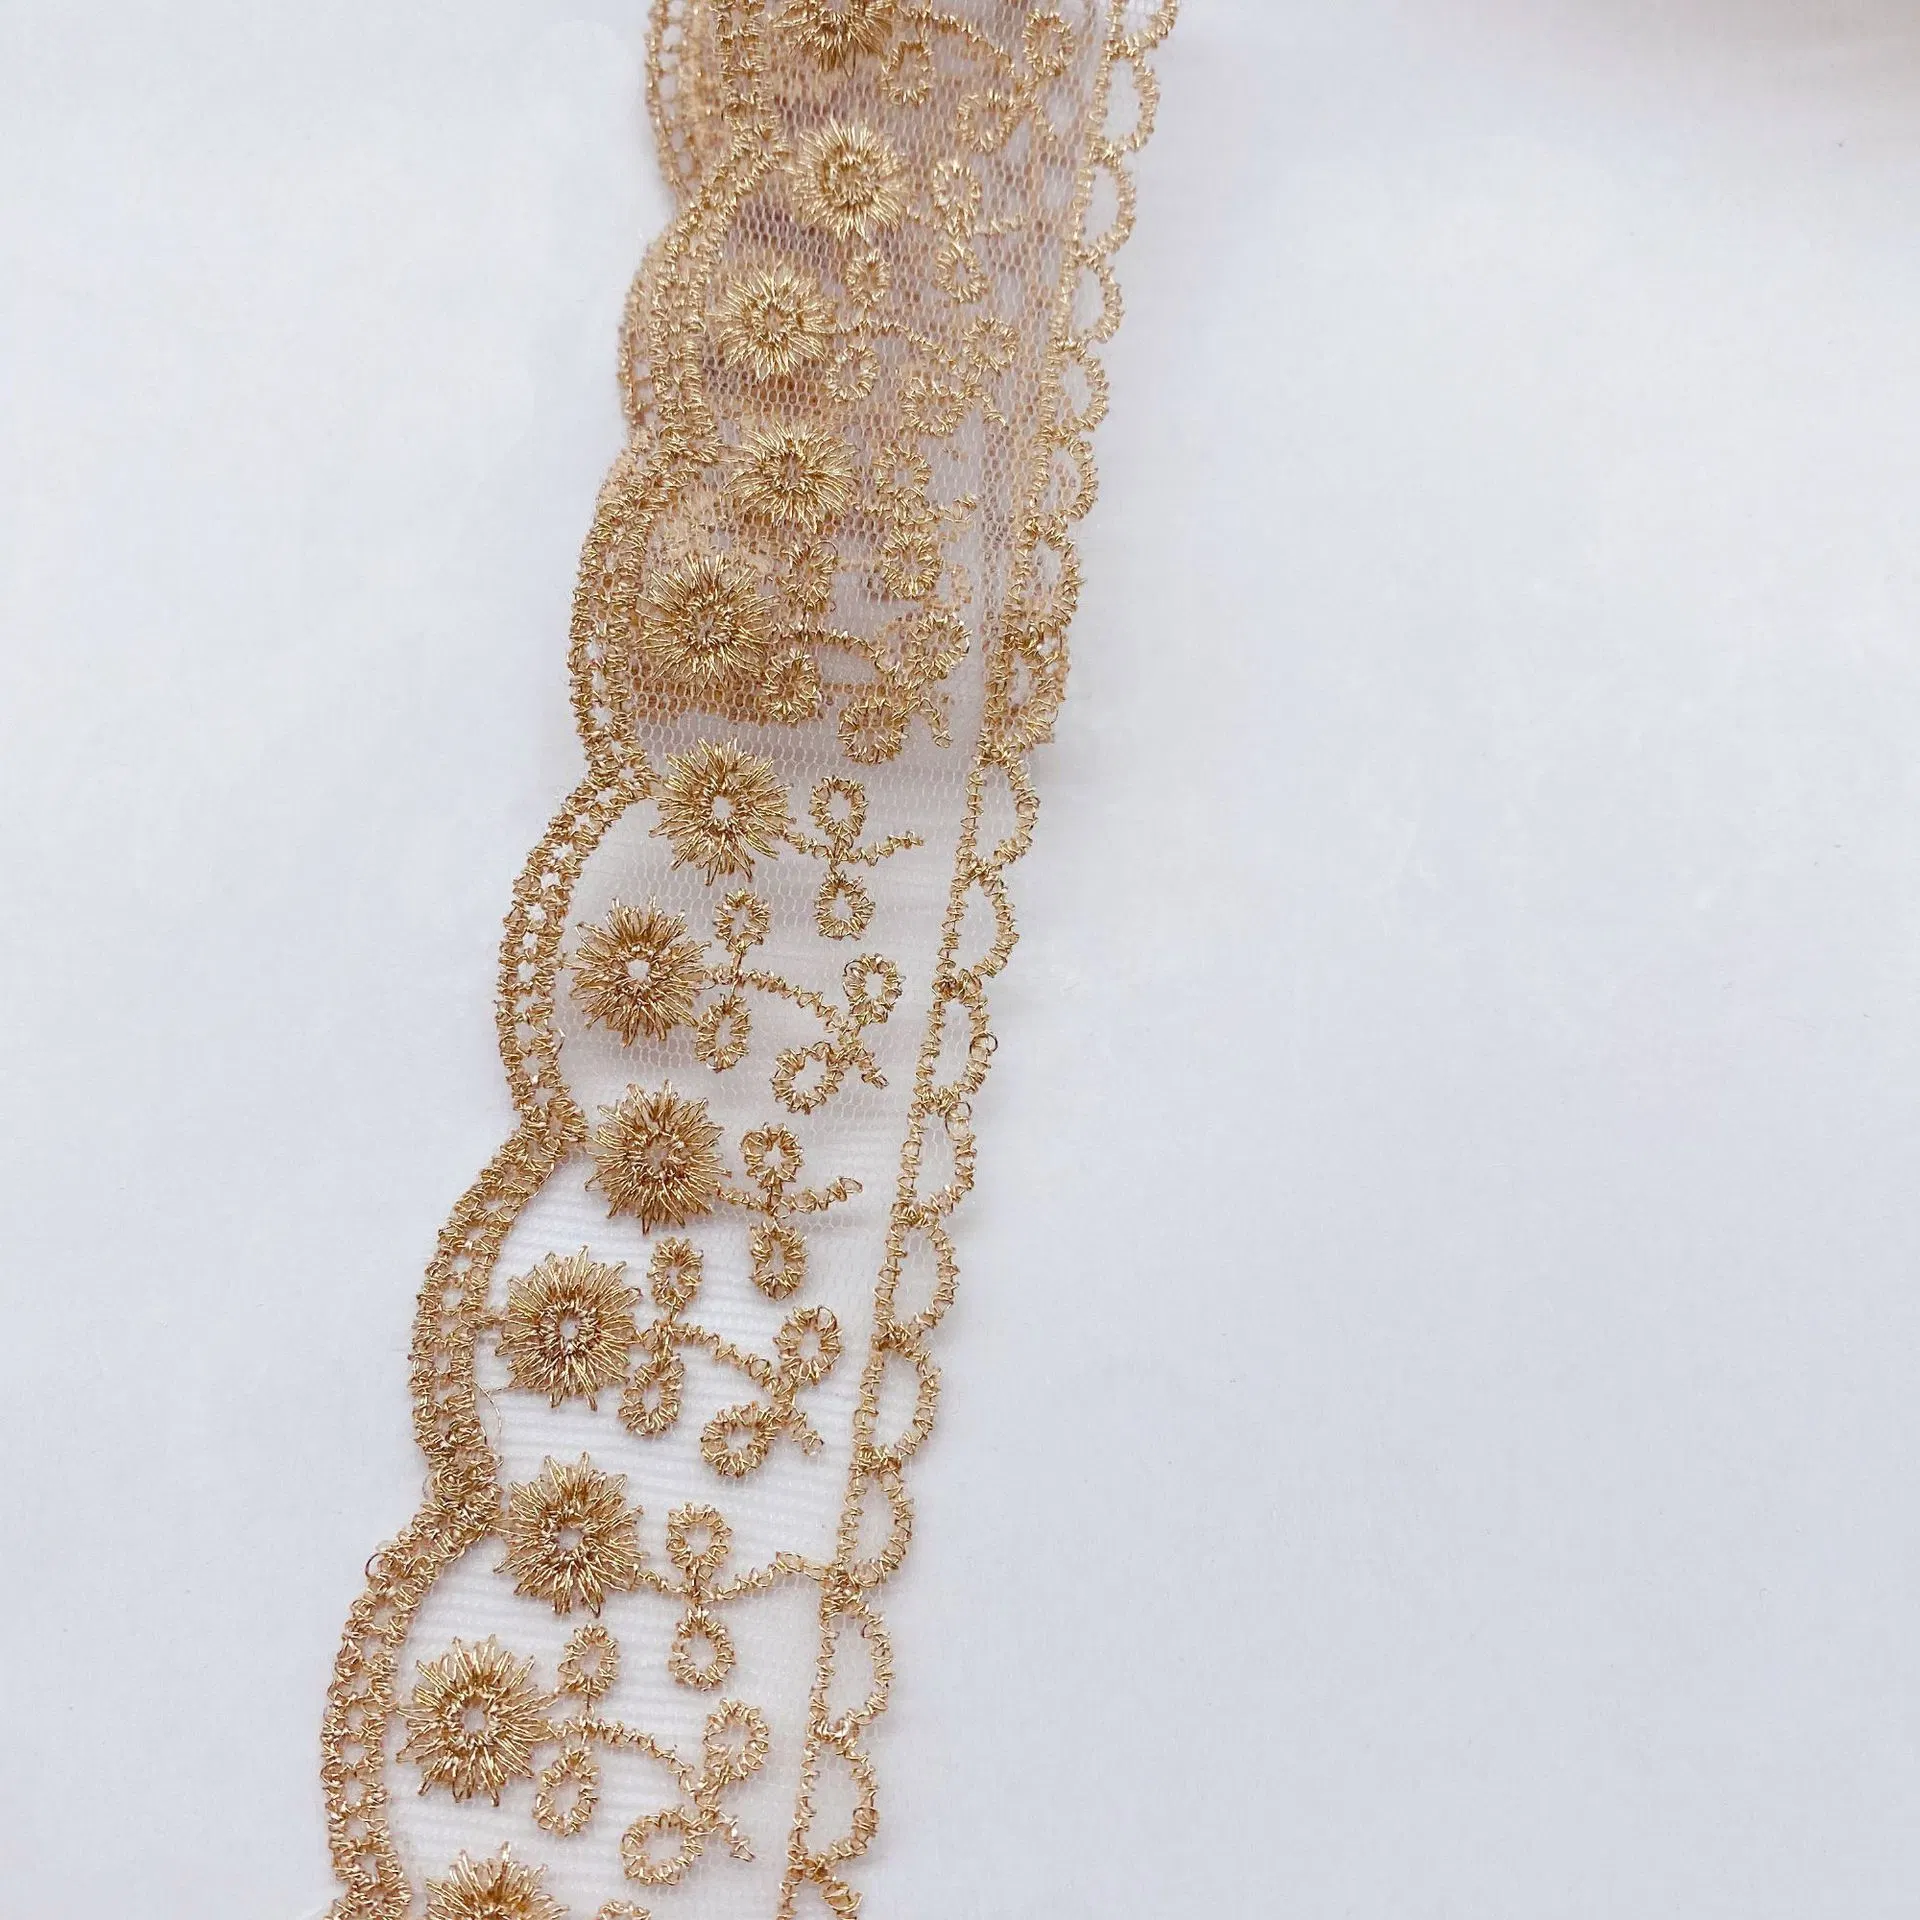 Embroidered Lace Dress with Small Flowers in Water Soluble Gold Thread Lace Embroidery